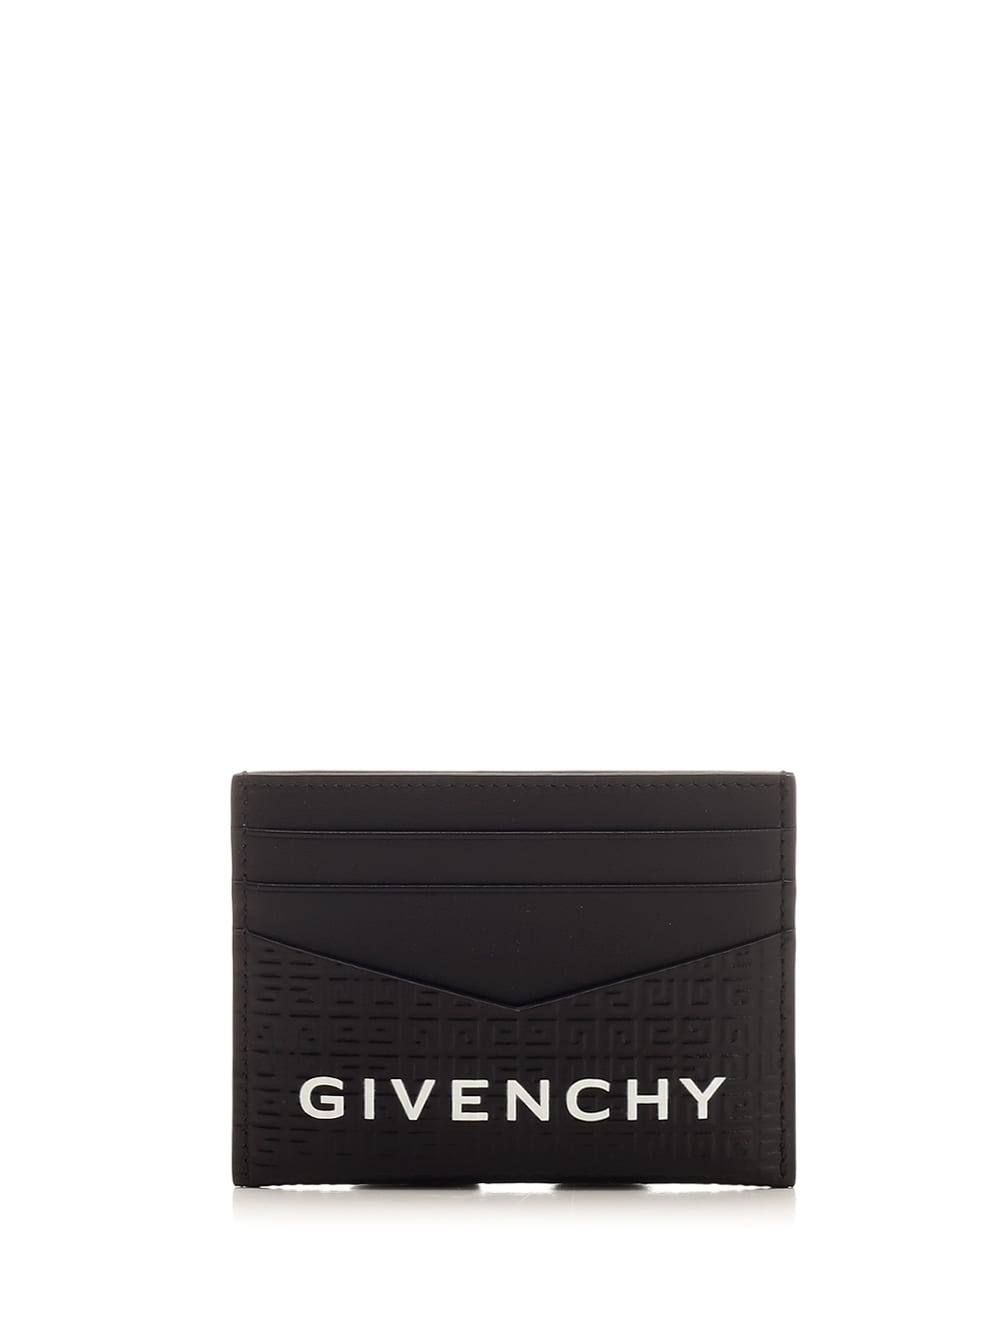 Givenchy Card Holder In Brown